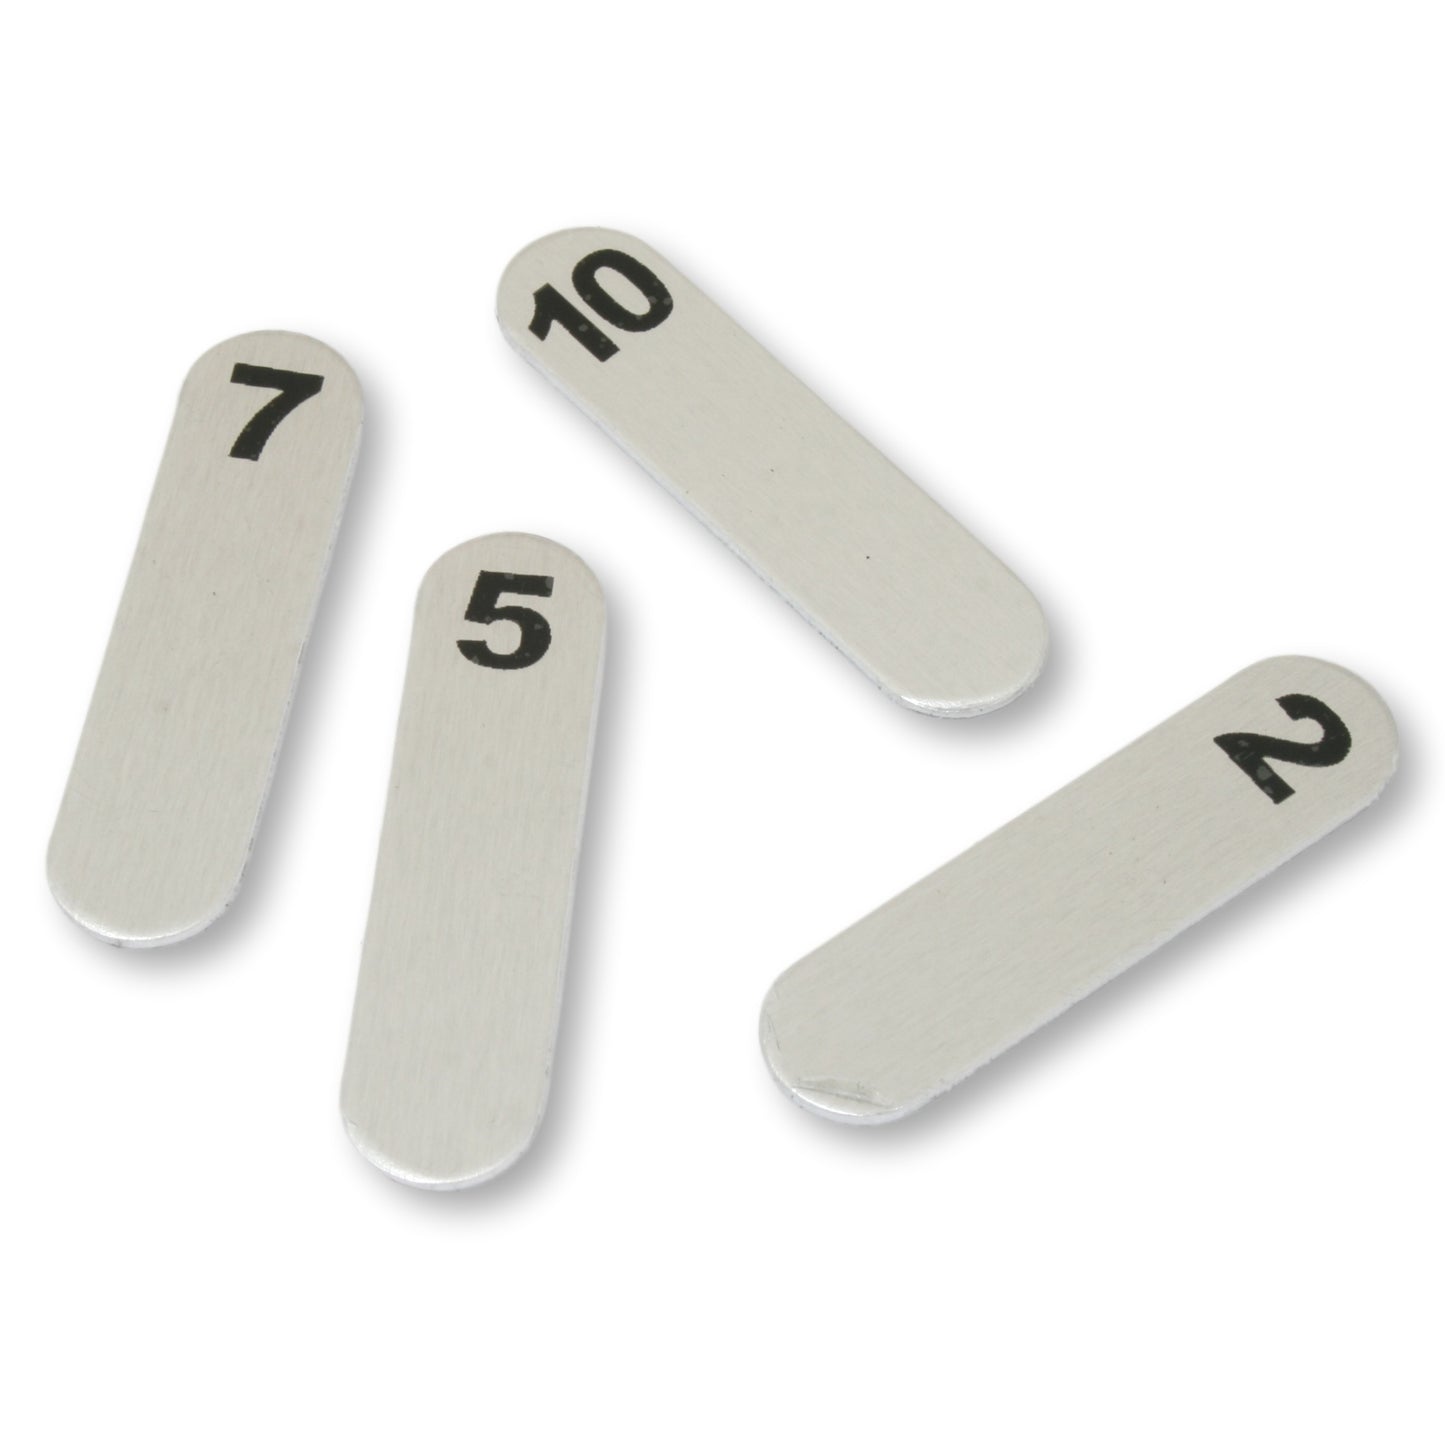 peg position finders 1-10 pegs